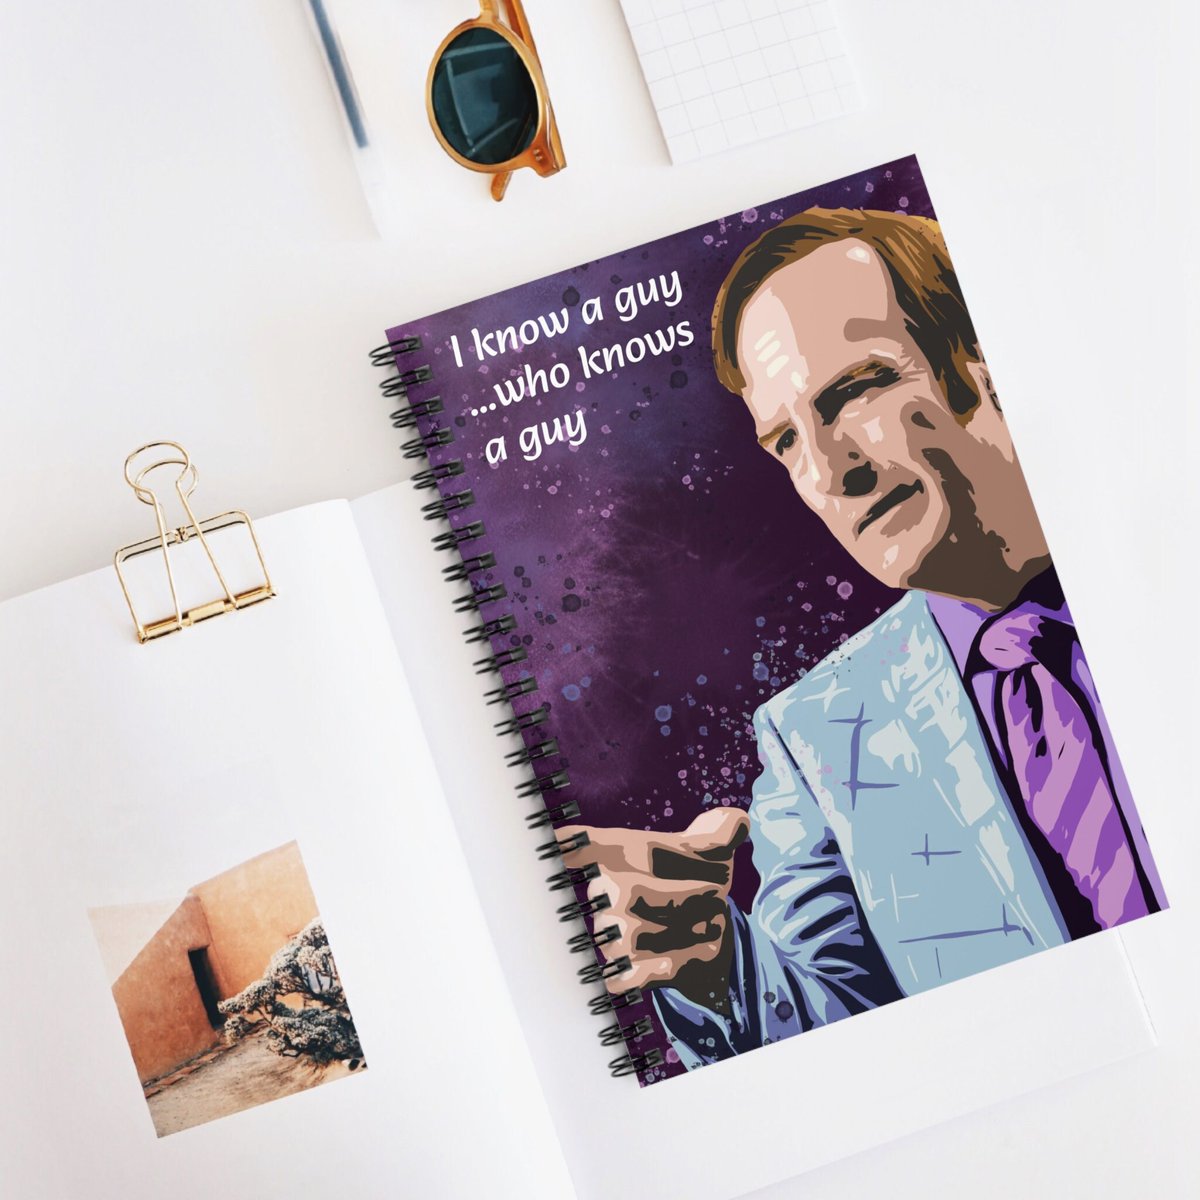 Better Call Saul Inspired Spiral Notebook - Ruled Line, Saul Goodman themed journal, gift idea, I know a guy who knows a guy tuppu.net/5da6b7b6 #GiftIdeas #Artwork #GreetingCards #WhoKnowsAGuy